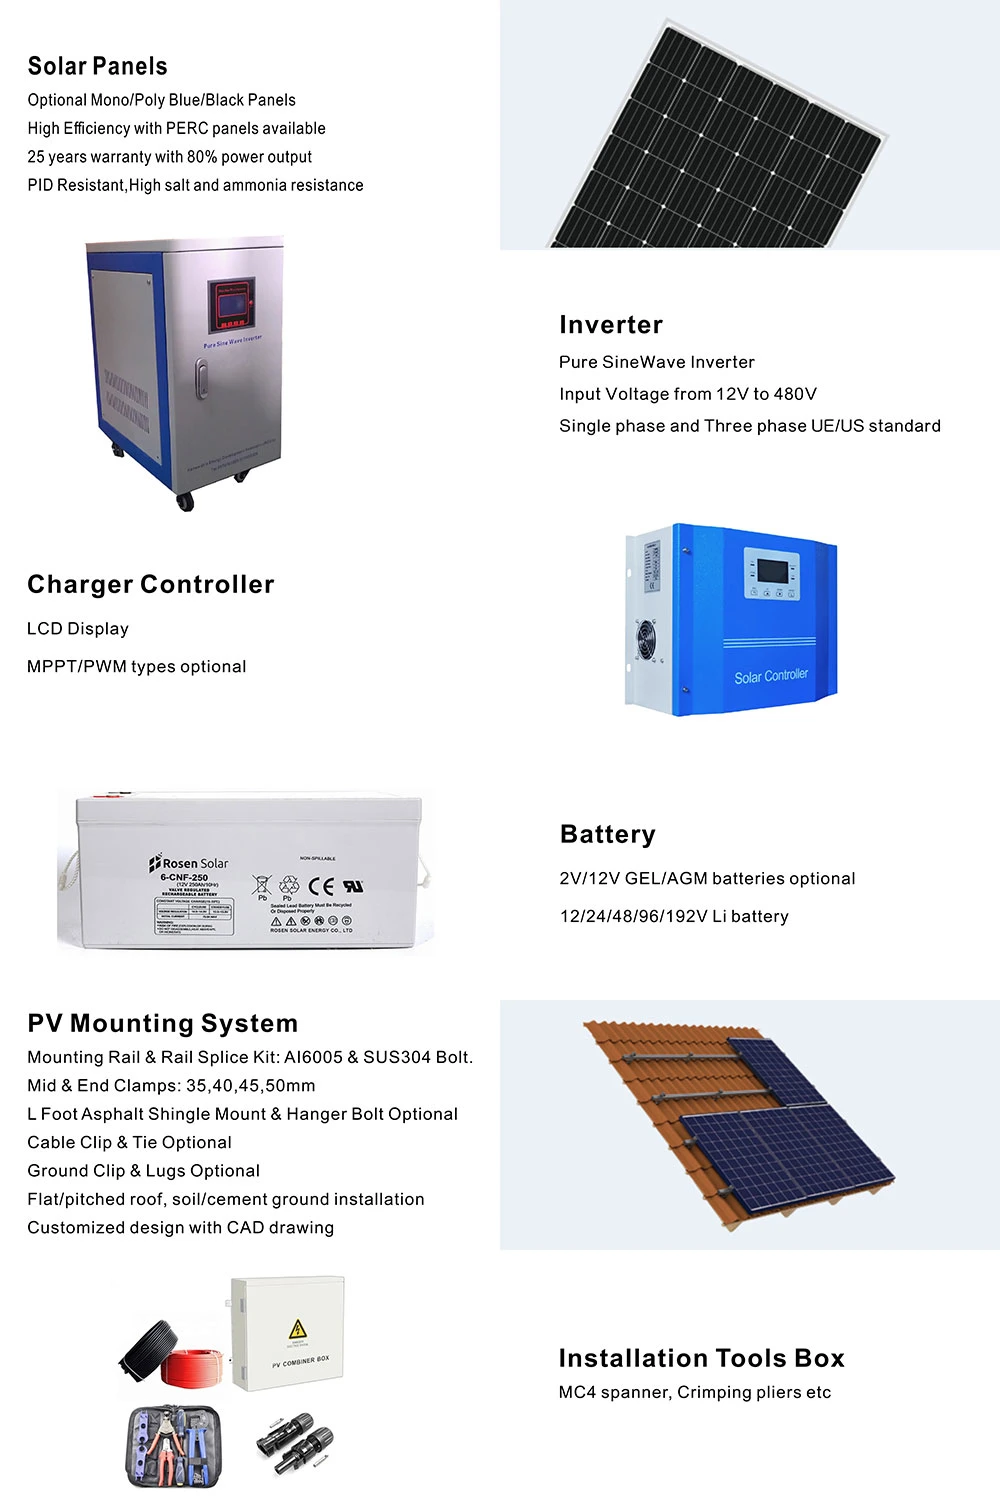 Complete 10kw Solar Panel PV System for Sale with Battery Backup